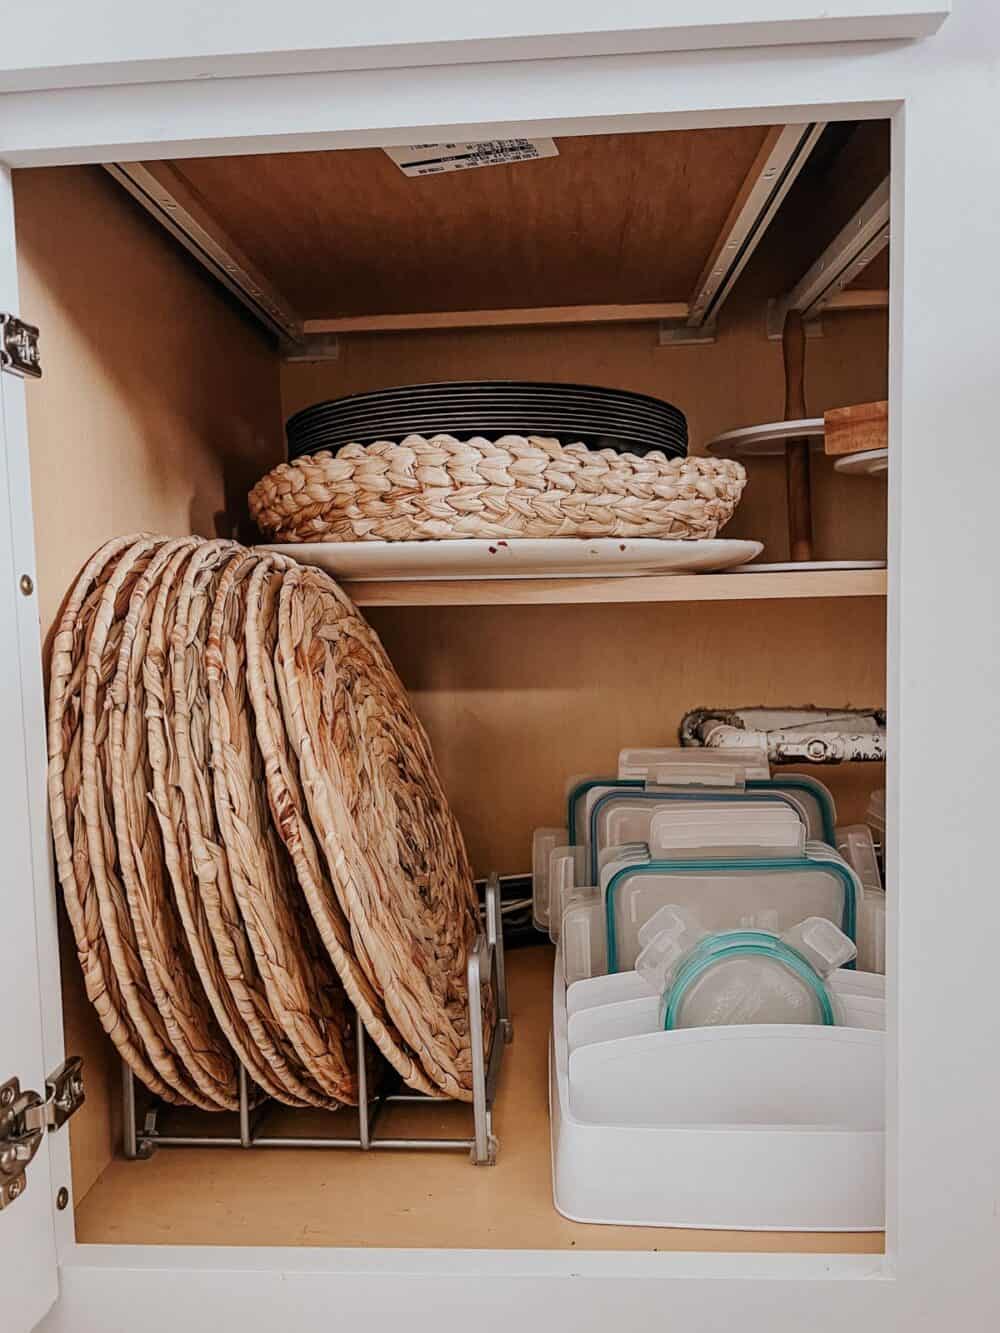 Kitchen Cabinet Organization {Taming the Tupperware} - Sand and Sisal